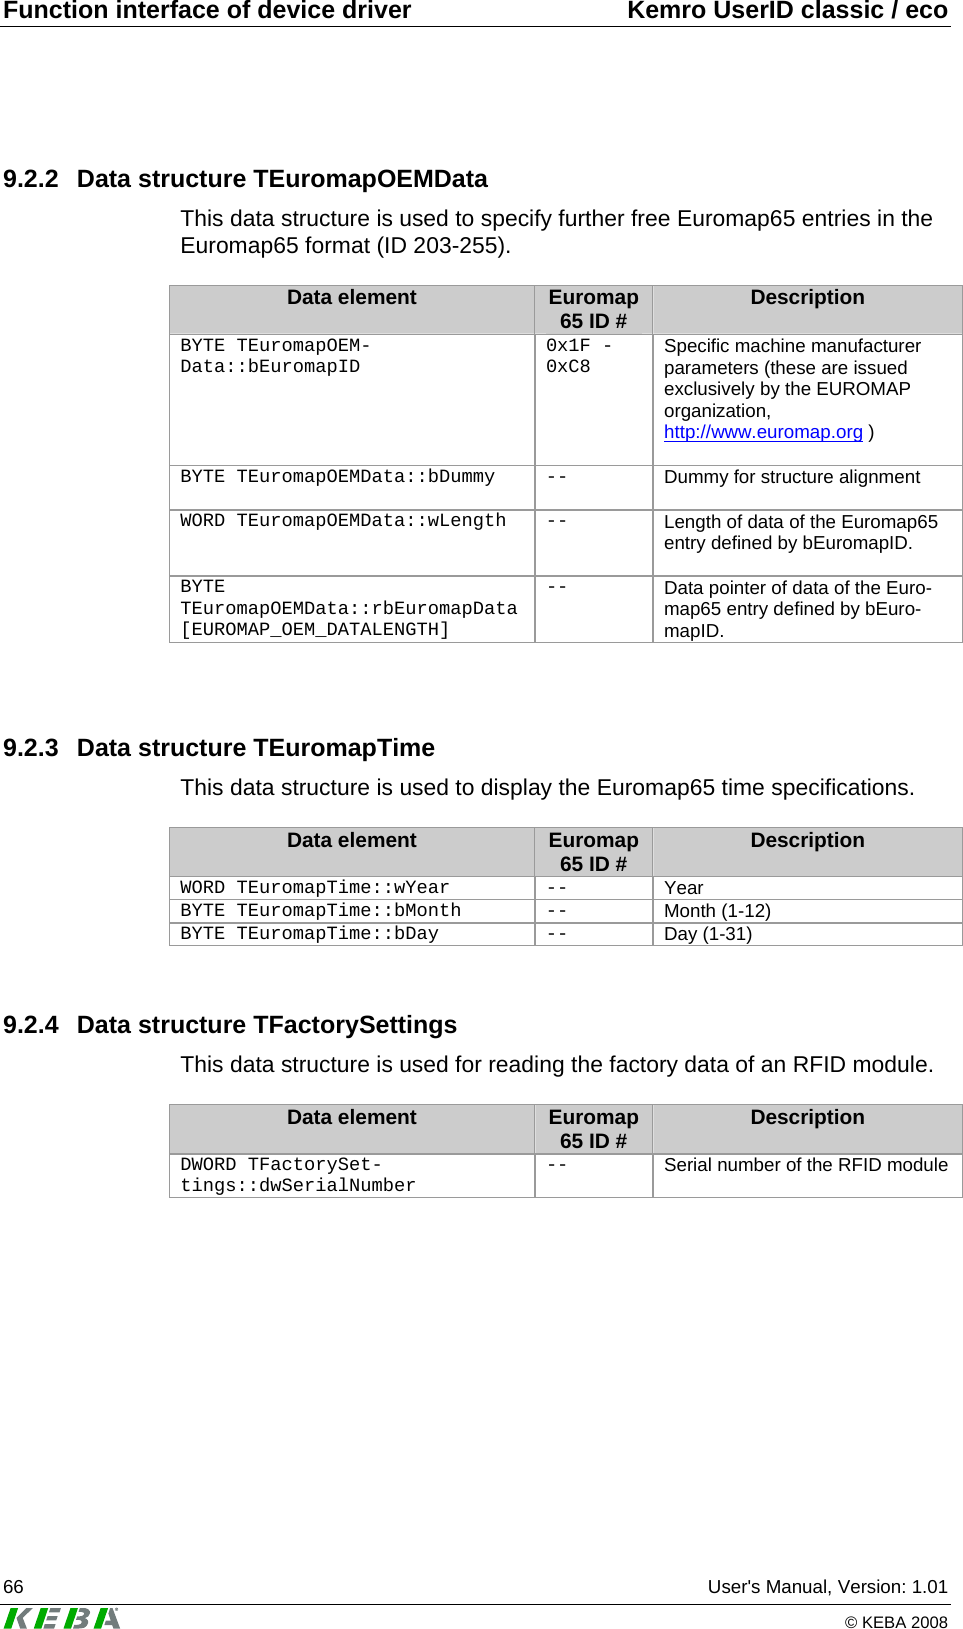 Function interface of device driver  Kemro UserID classic / eco 66  User&apos;s Manual, Version: 1.01   © KEBA 2008 9.2.2  Data structure TEuromapOEMData This data structure is used to specify further free Euromap65 entries in the Euromap65 format (ID 203-255).  Data element  Euromap 65 ID #  Description BYTE TEuromapOEM-Data::bEuromapID 0x1F - 0xC8  Specific machine manufacturer parameters (these are issued exclusively by the EUROMAP organization, H1Hhttp://www.euromap.orgH )  BYTE TEuromapOEMData::bDummy  --  Dummy for structure alignment   WORD TEuromapOEMData::wLength  --  Length of data of the Euromap65 entry defined by bEuromapID.   BYTE TEuromapOEMData::rbEuromapData[EUROMAP_OEM_DATALENGTH] --  Data pointer of data of the Euro-map65 entry defined by bEuro-mapID.    9.2.3  Data structure TEuromapTime This data structure is used to display the Euromap65 time specifications.  Data element  Euromap 65 ID #  Description WORD TEuromapTime::wYear  --  Year  BYTE TEuromapTime::bMonth  --  Month (1-12)  BYTE TEuromapTime::bDay  --  Day (1-31)  9.2.4  Data structure TFactorySettings This data structure is used for reading the factory data of an RFID module.  Data element  Euromap 65 ID #  Description DWORD TFactorySet-tings::dwSerialNumber --  Serial number of the RFID module  